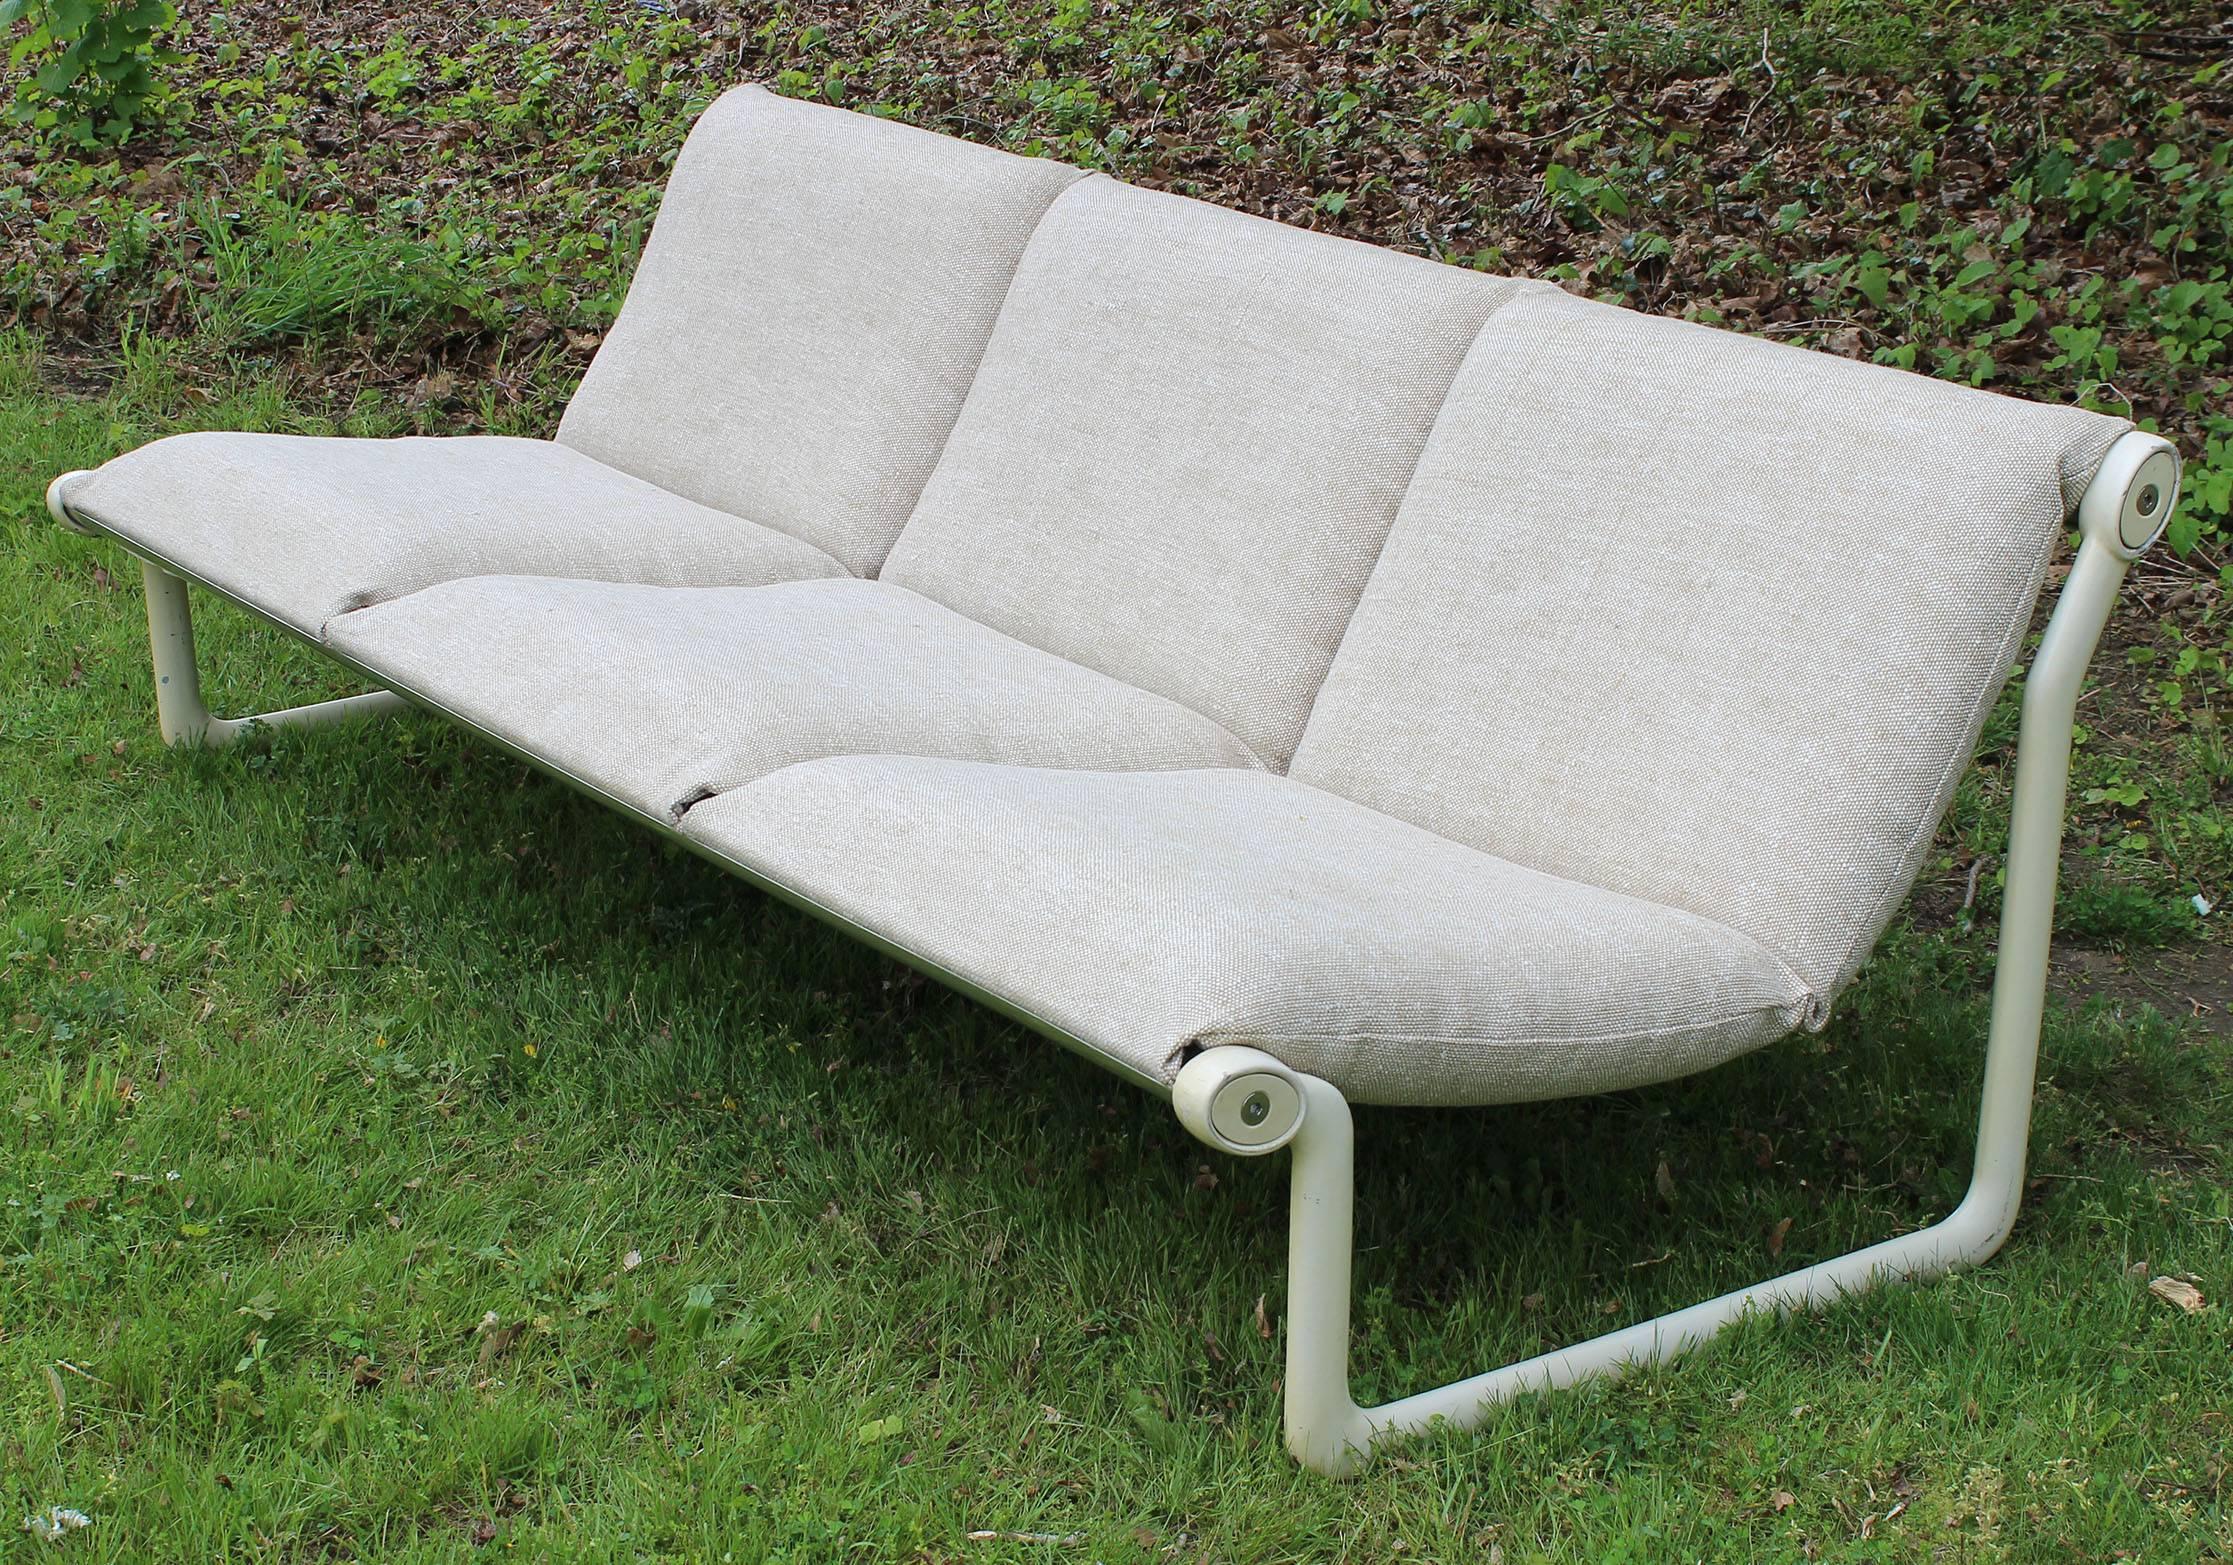 Hannah Morrison for Knoll Sling sofa oatmeal cotton blend upholstery. Inspired by the extruded aluminum of a sailboat mast.